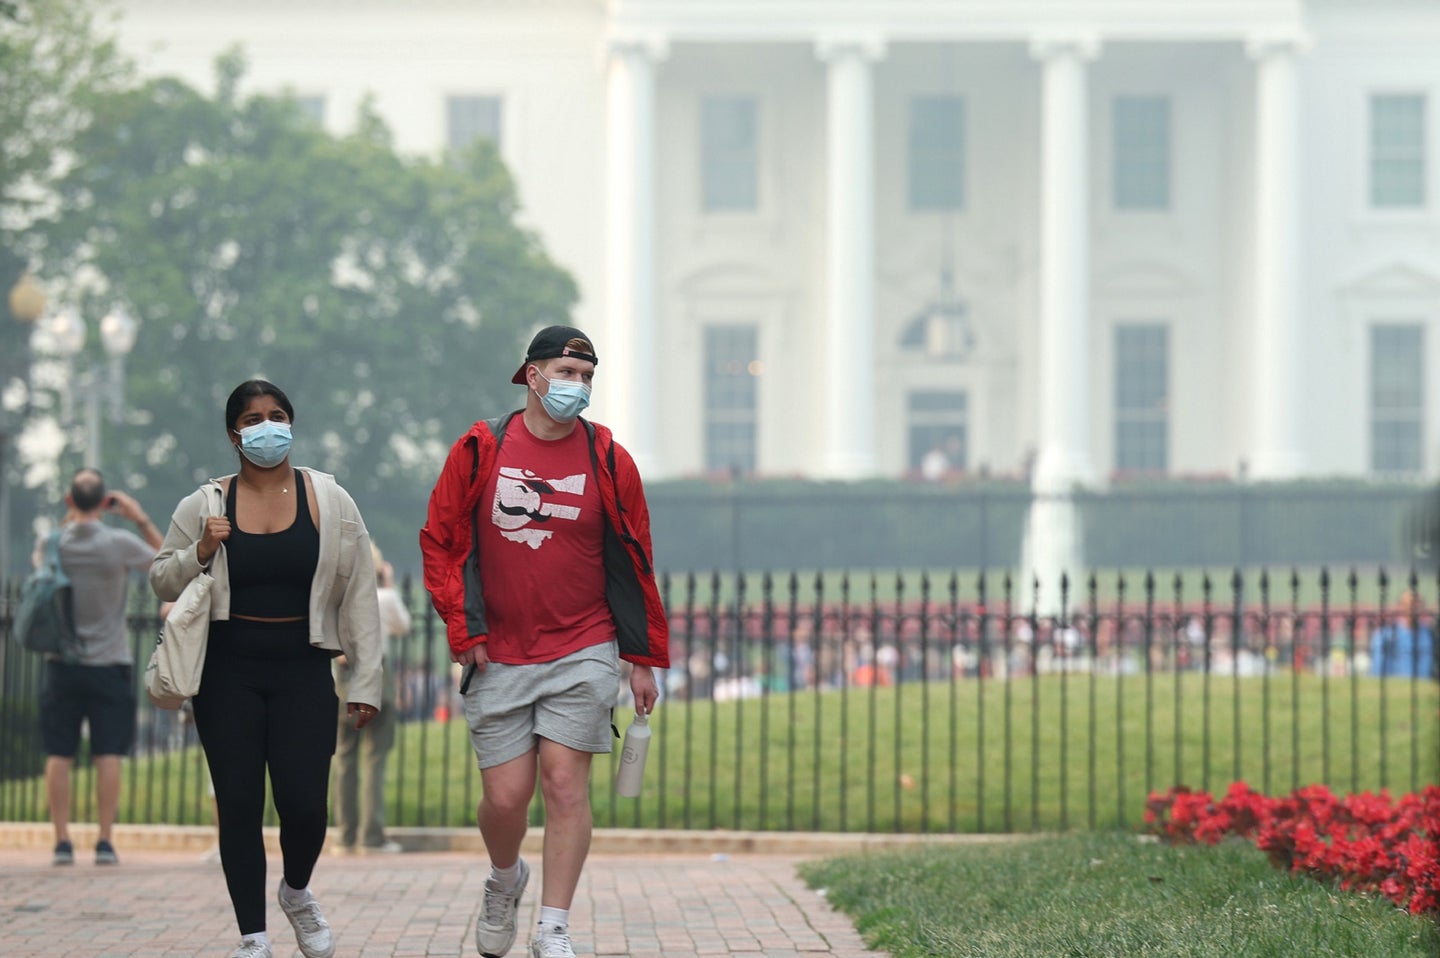 People wearing masks for wildfire smoke and bad air quality in front of White House